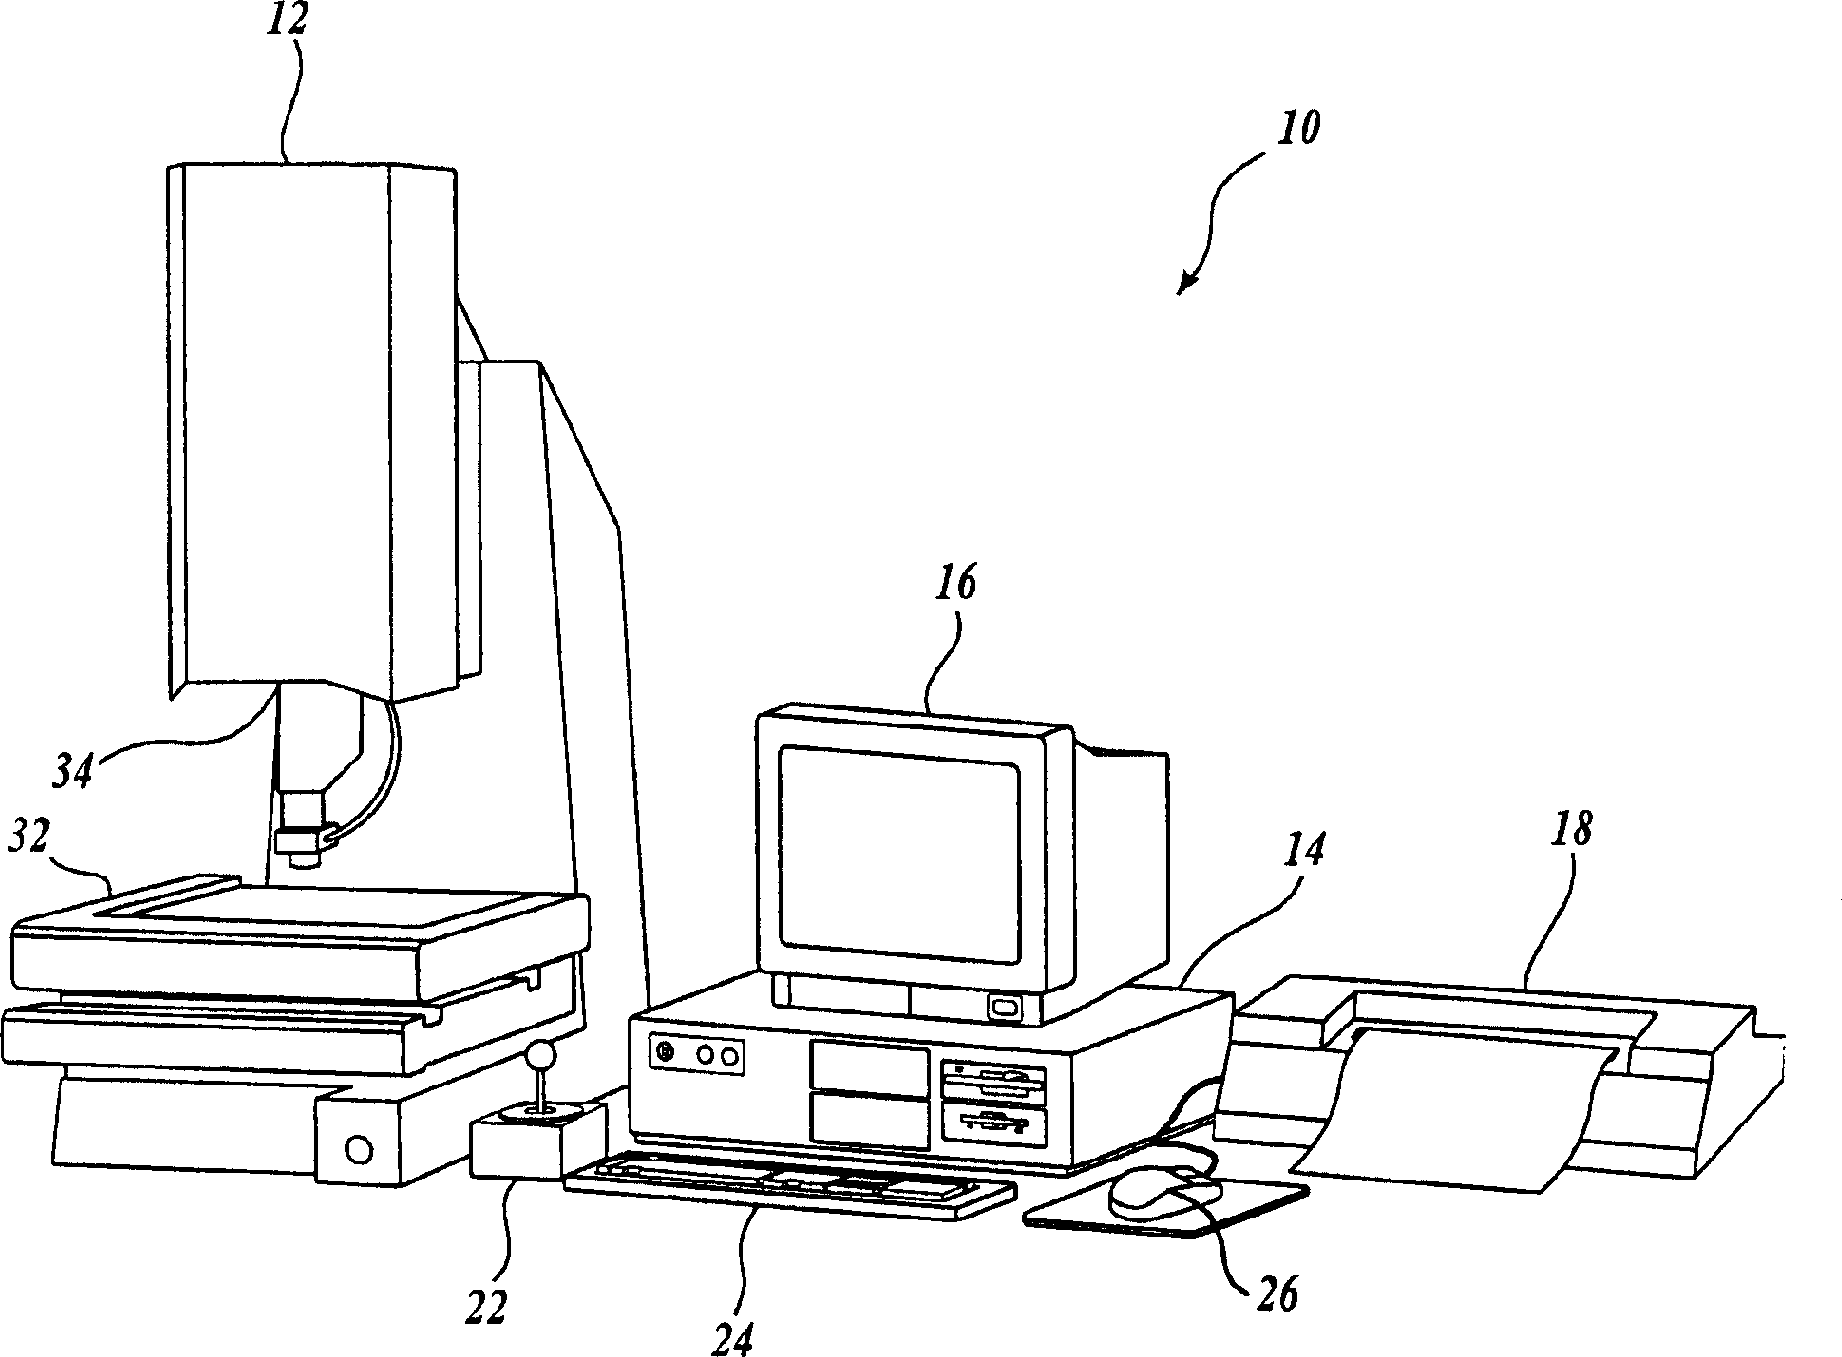 Machine vision inspection system and method having improved operations for increased precision inspection throughput